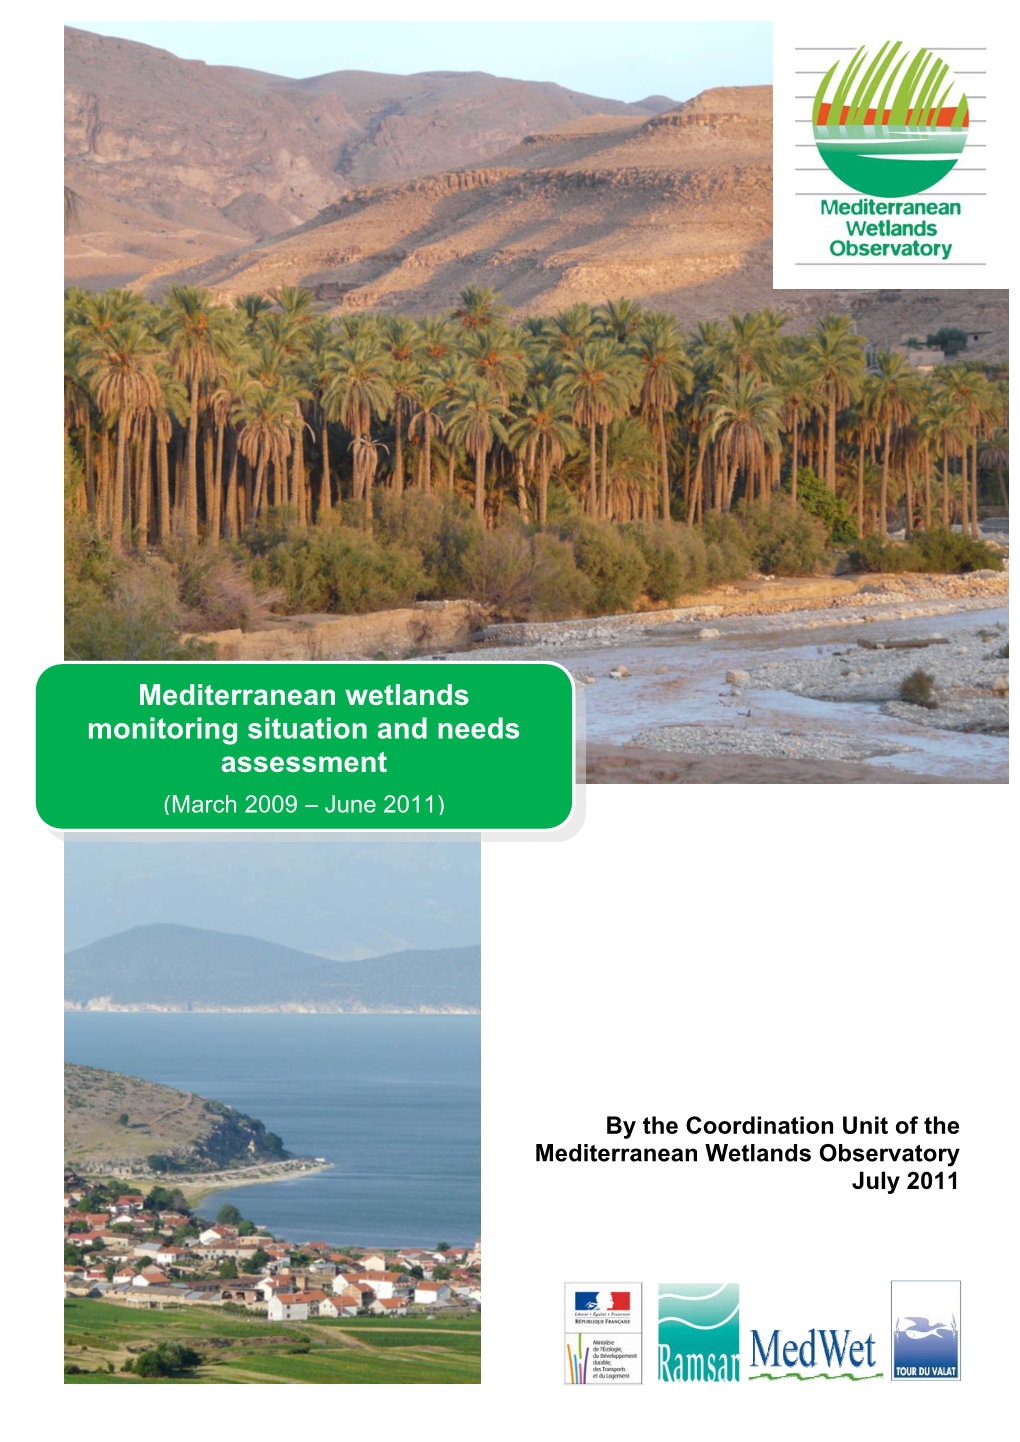 Mediterranean Wetlands Monitoring Situation and Needs Assessment